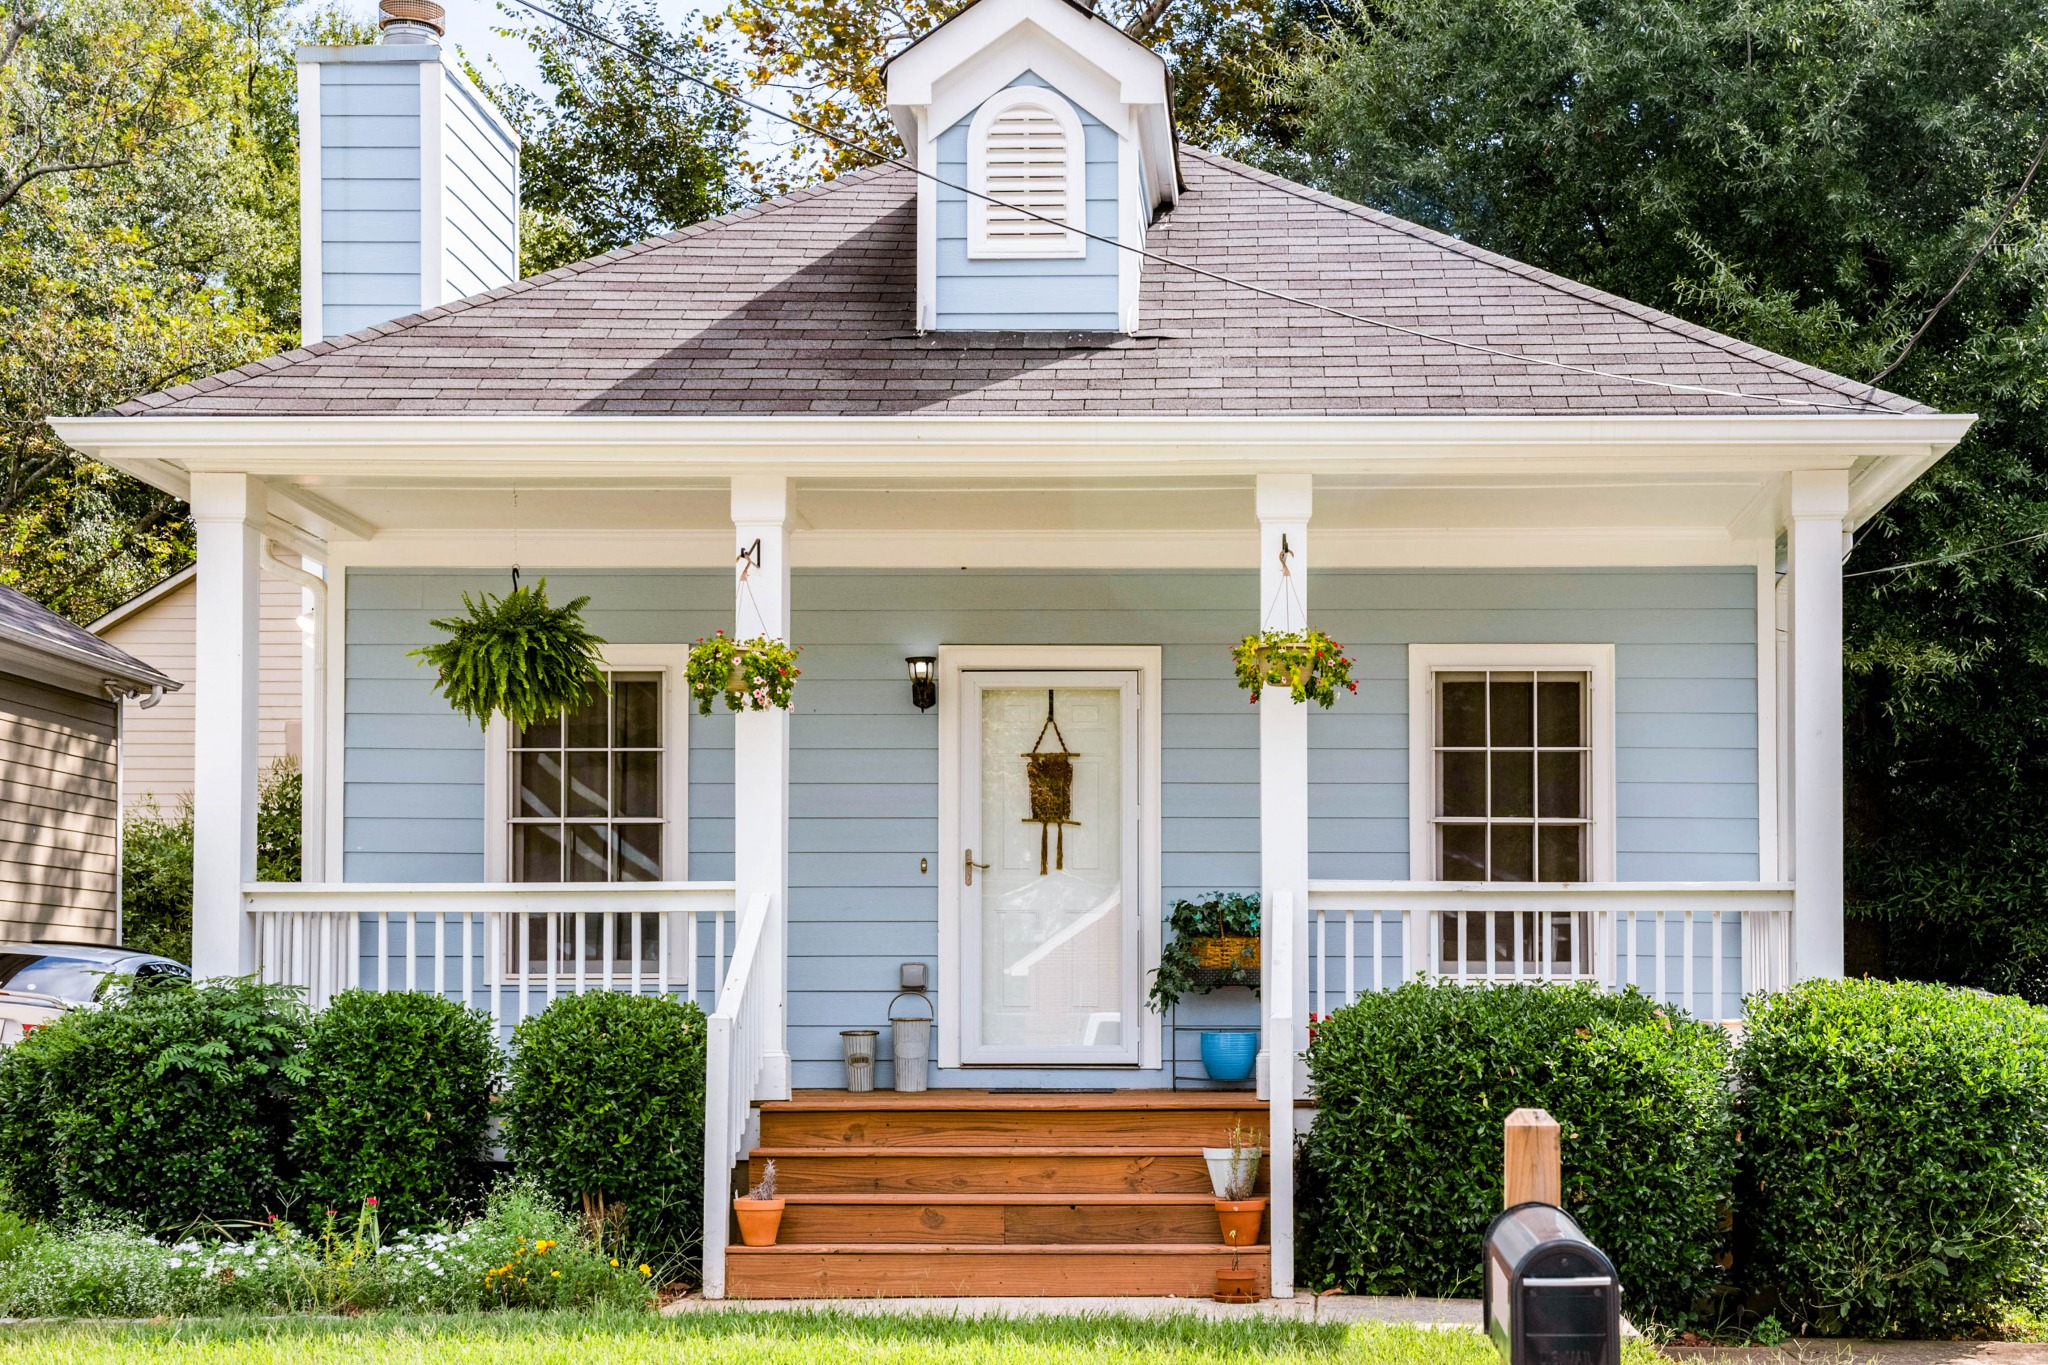 Should I Buy A Starter Home? | Zillow